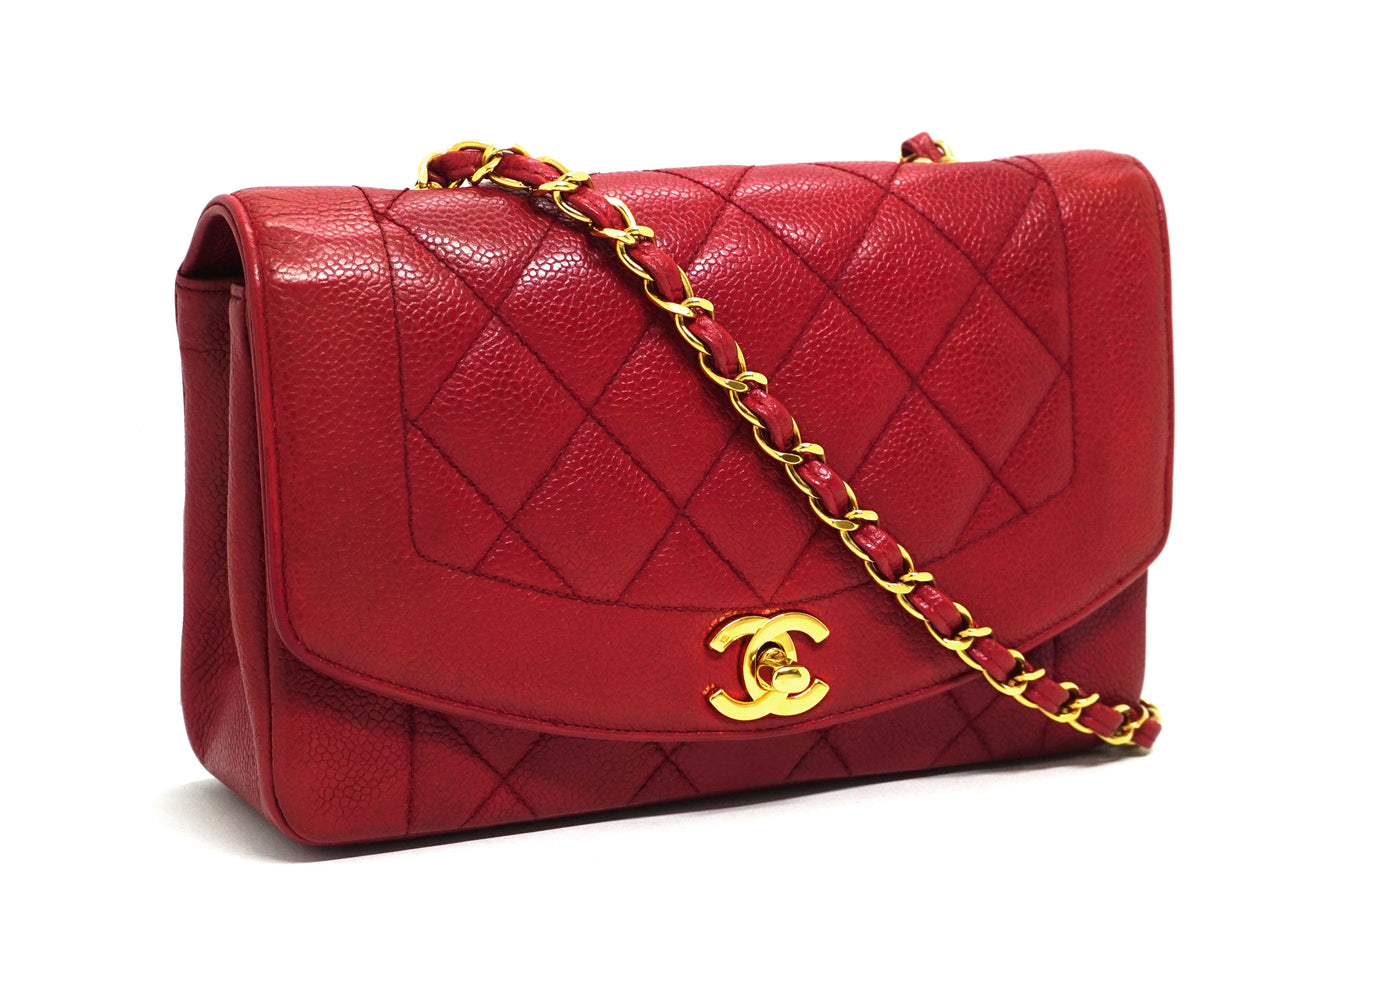 red chanel bag with gold hardware